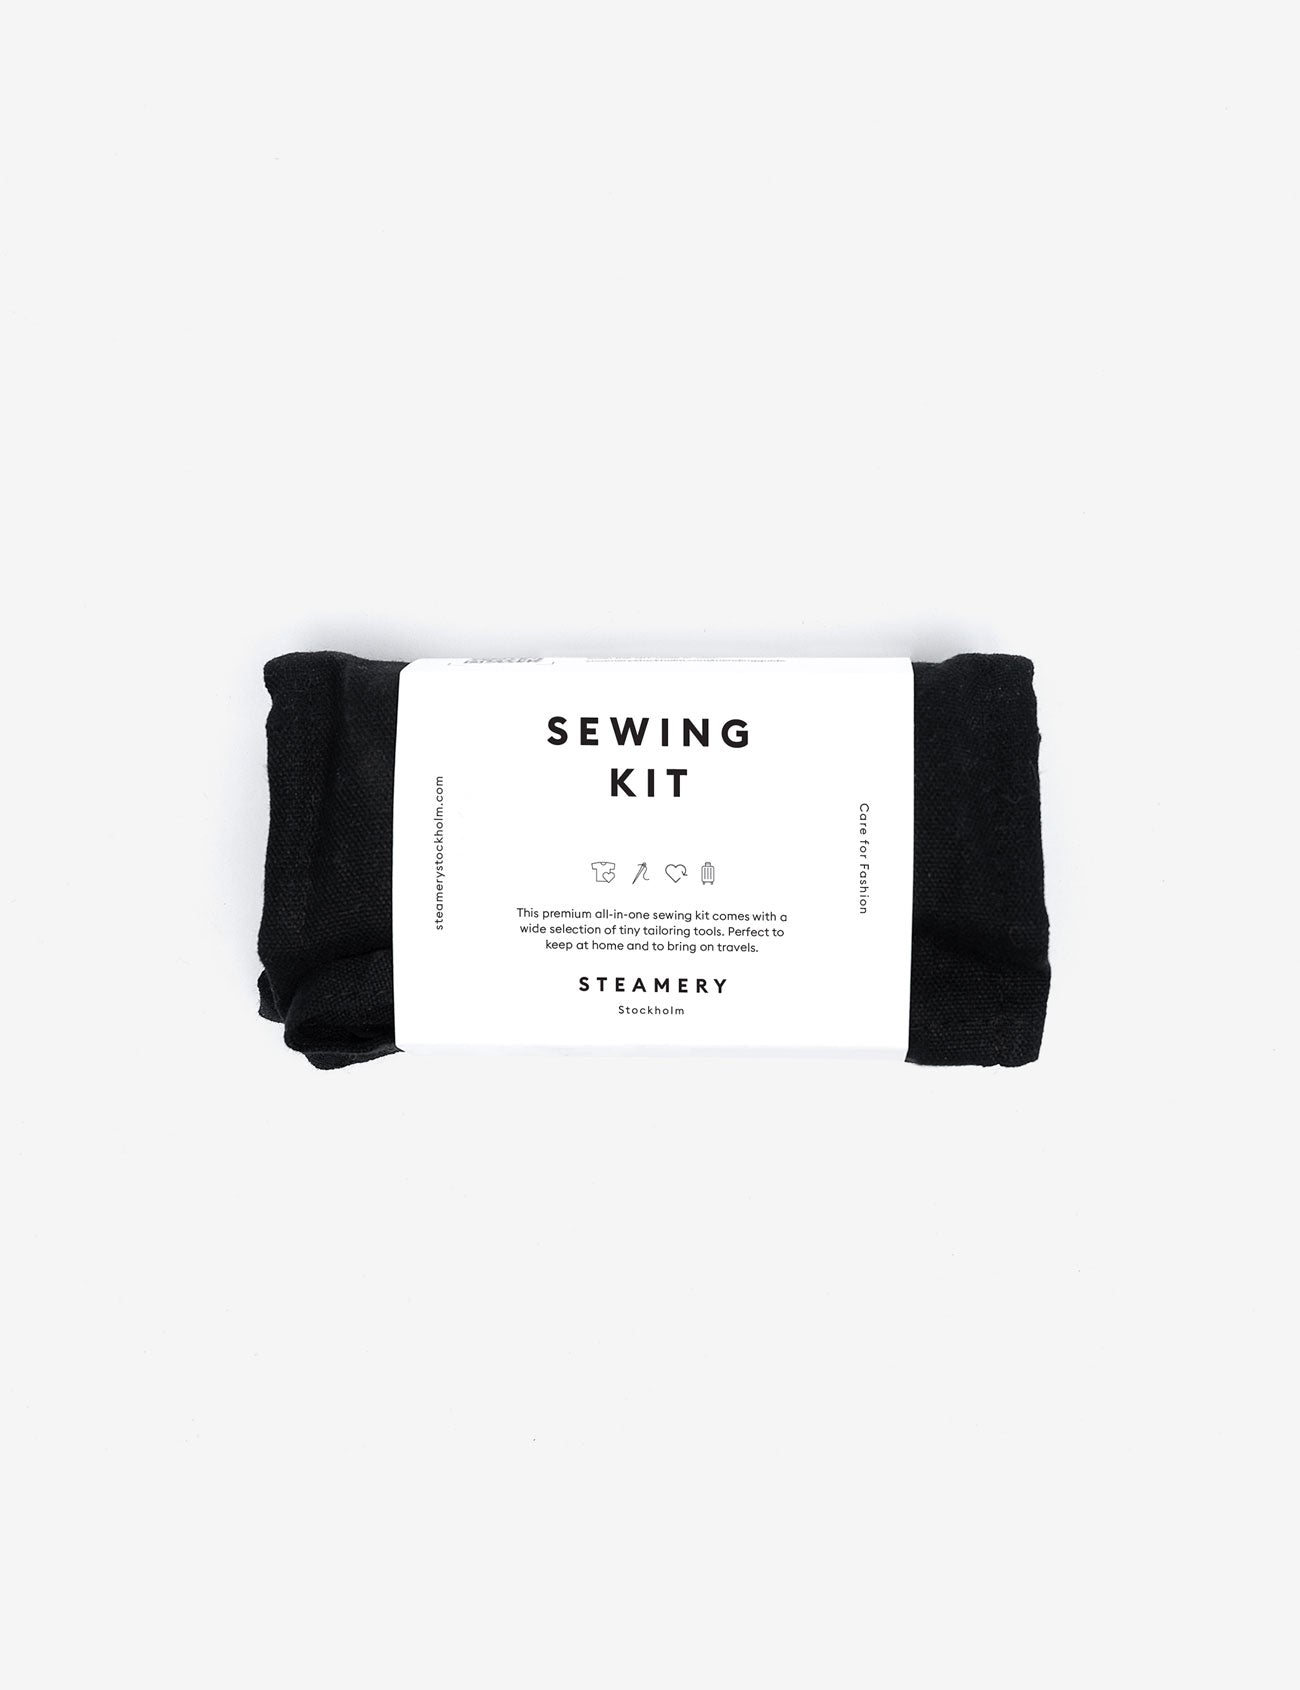 Sewing Kit - steamery-usa